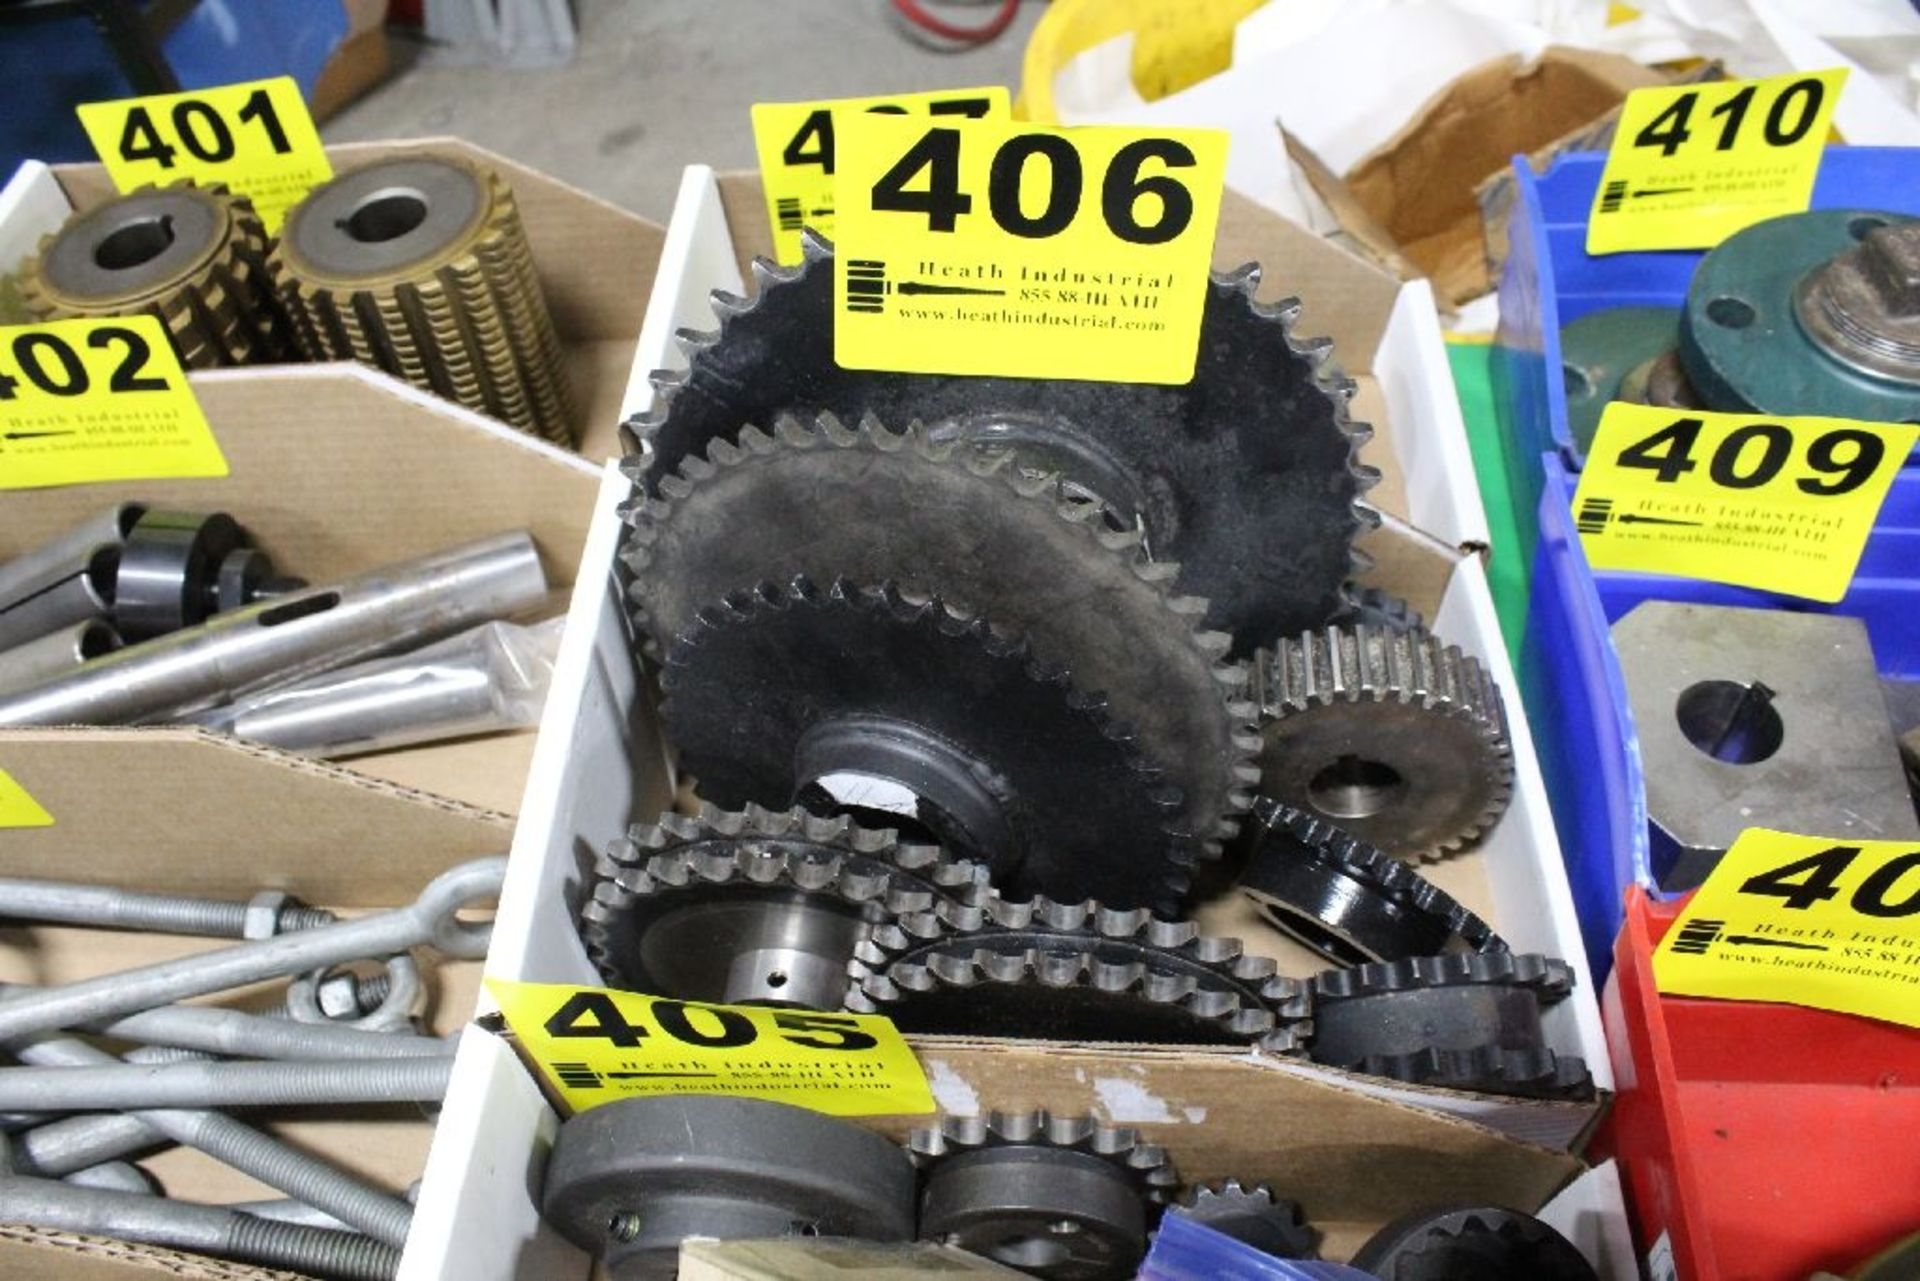 ASSORTED CHAIN GEARS